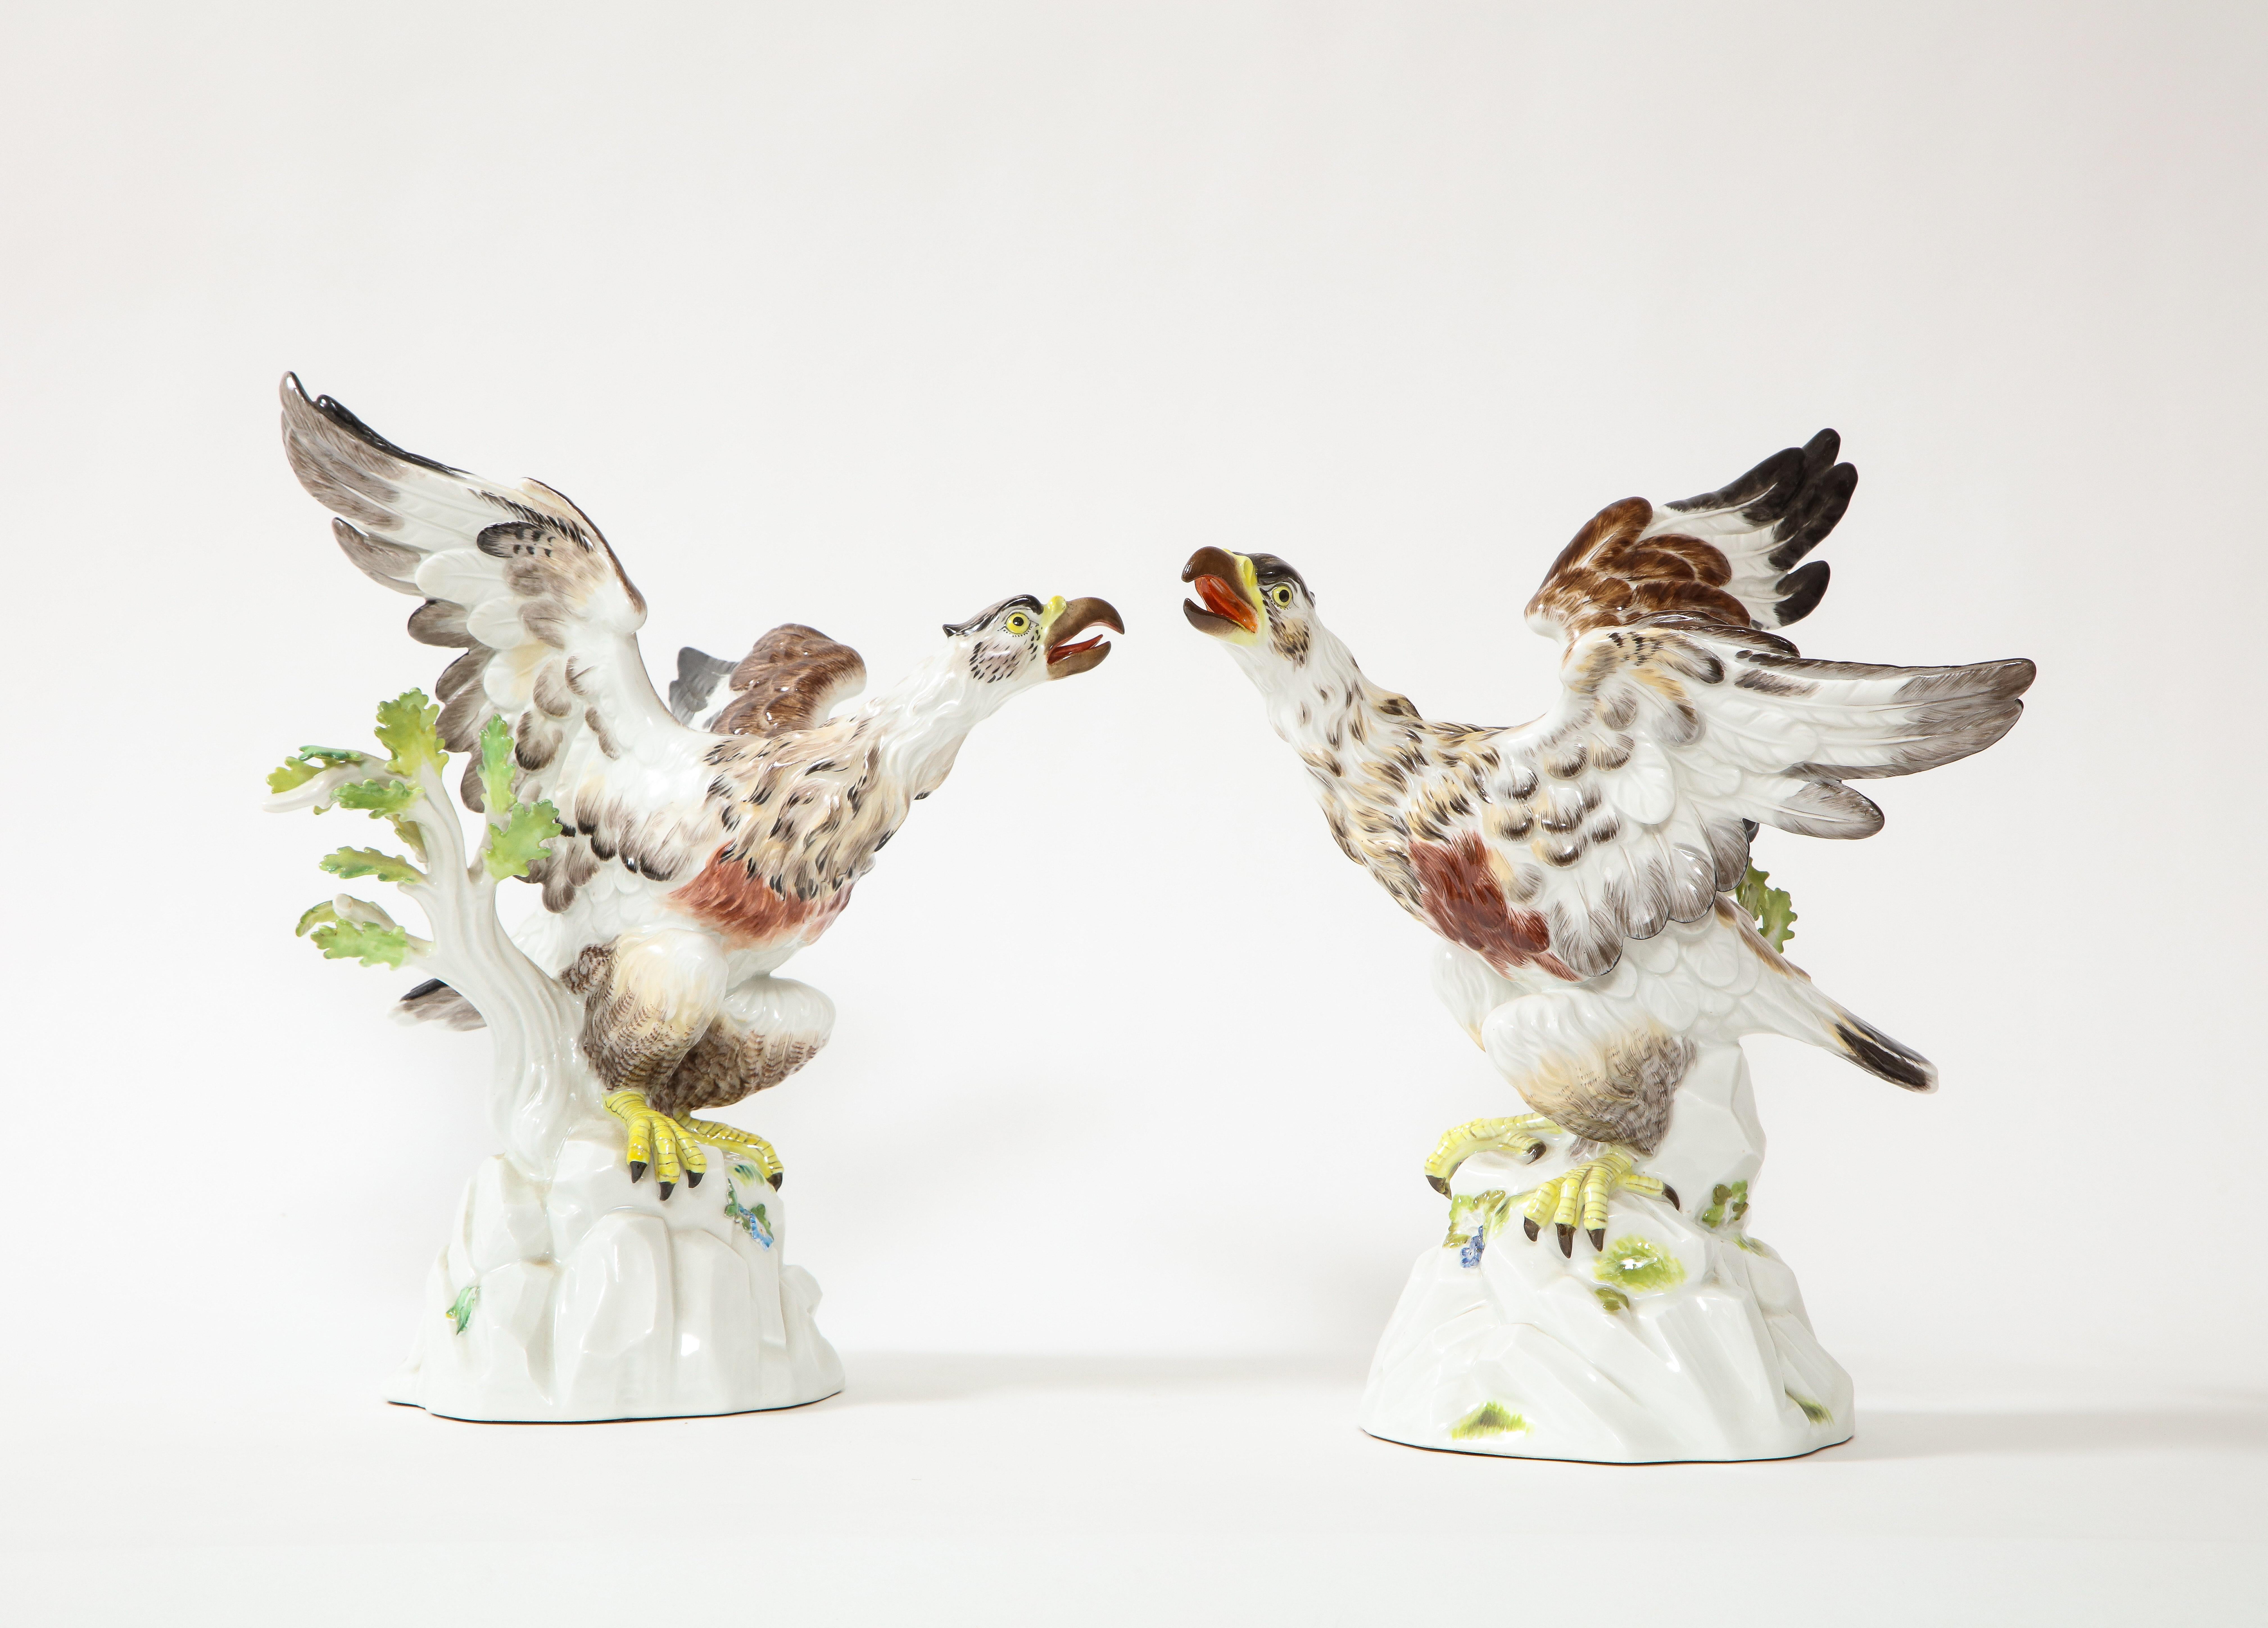 A fine pair of Early 20th Century Meissen Porcelain models of eagles naturalistically resting on branches. Each Eagle can be seen with their wings spread wide out and their beaks open. They are seated on a branch with their talons latched onto the